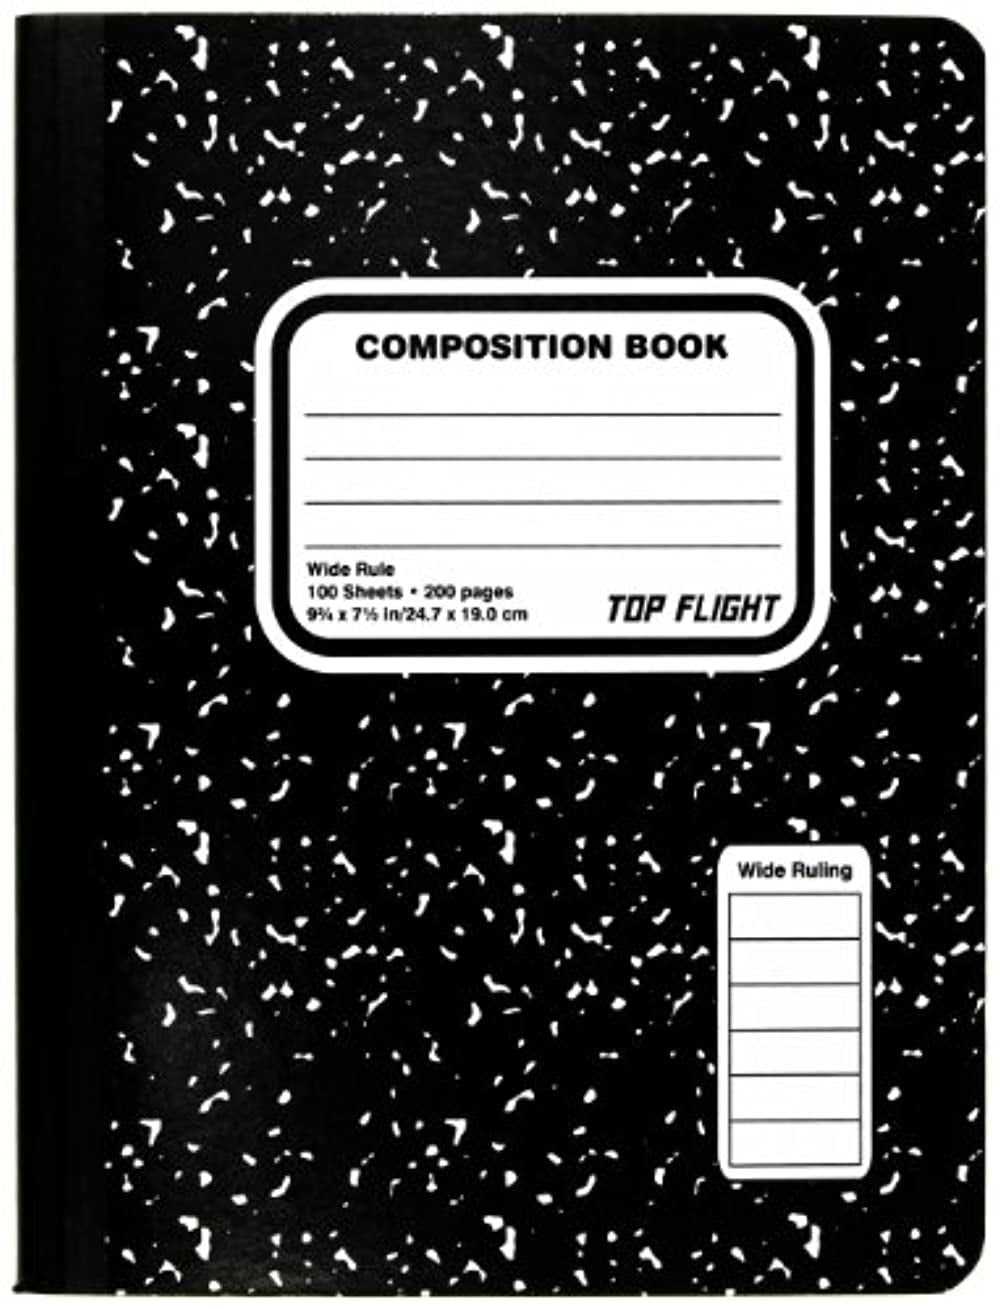 Emraw Black & White Marble Style Cover Composition Book with 100 Sheets of 2487 